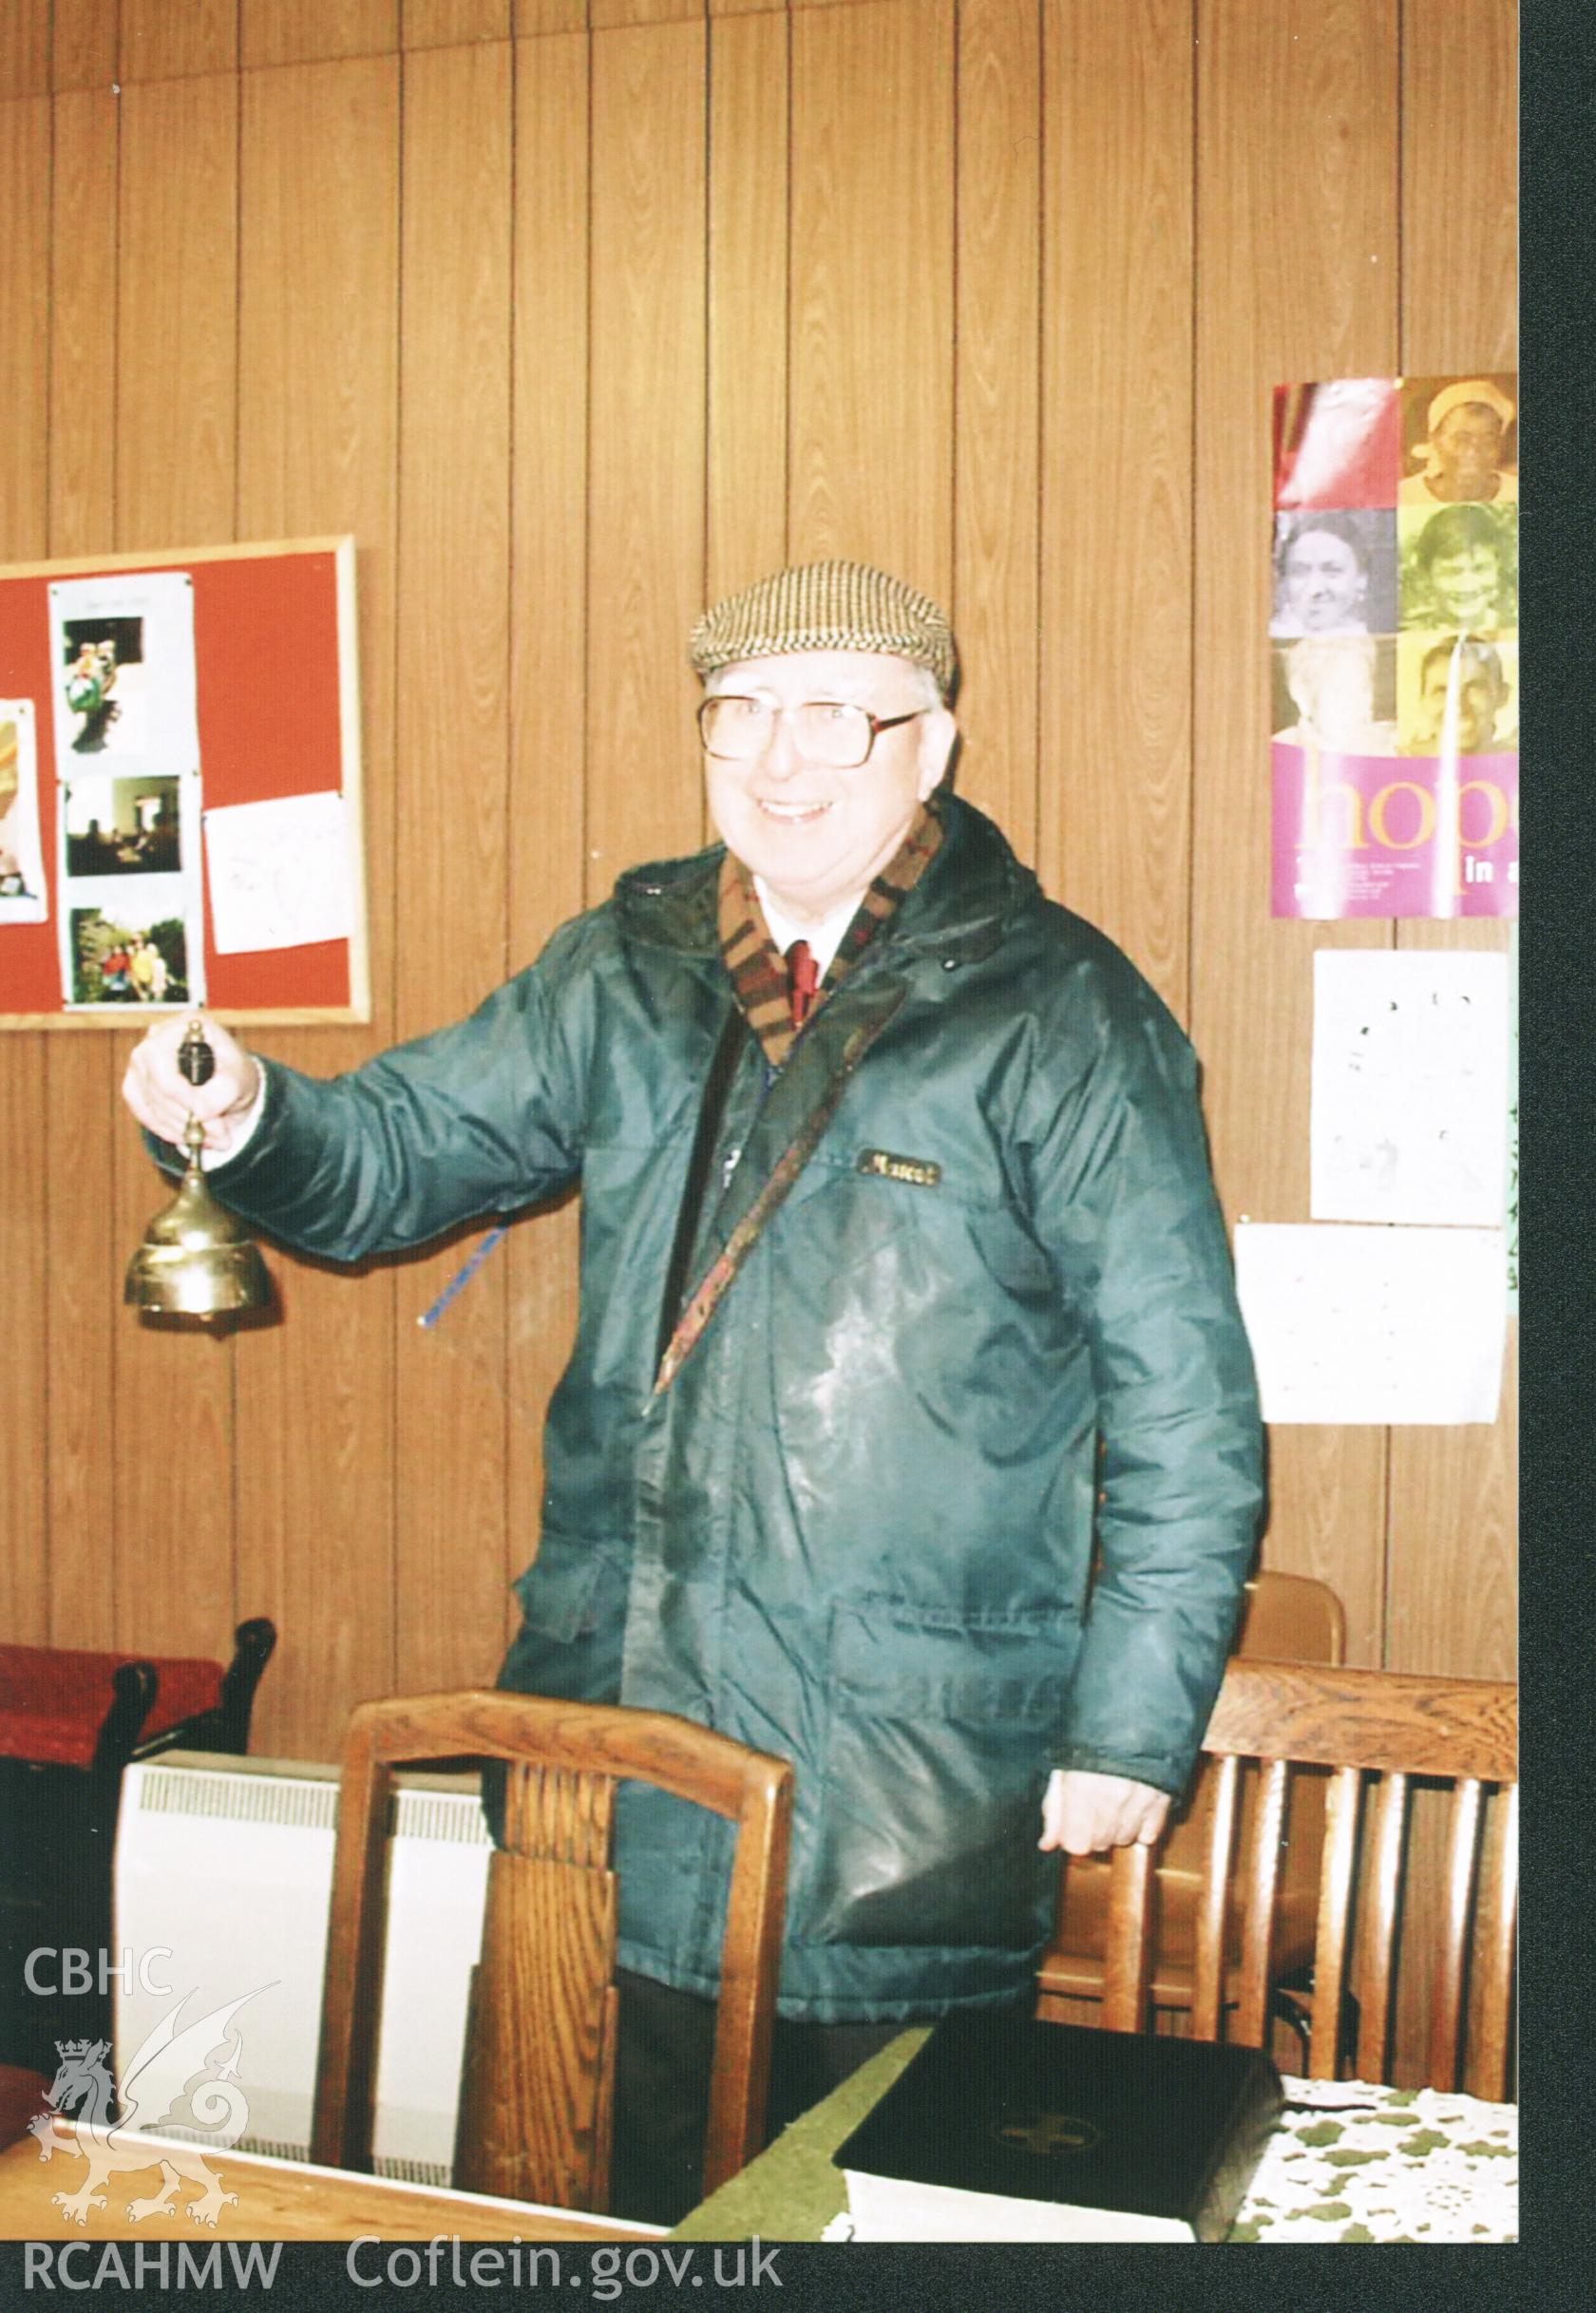 Colour photograph of Cyril Philips with the Sunday School Bell, 2005. Donated to the RCAHMW by Cyril Philips as part of the Digital Dissent Project.